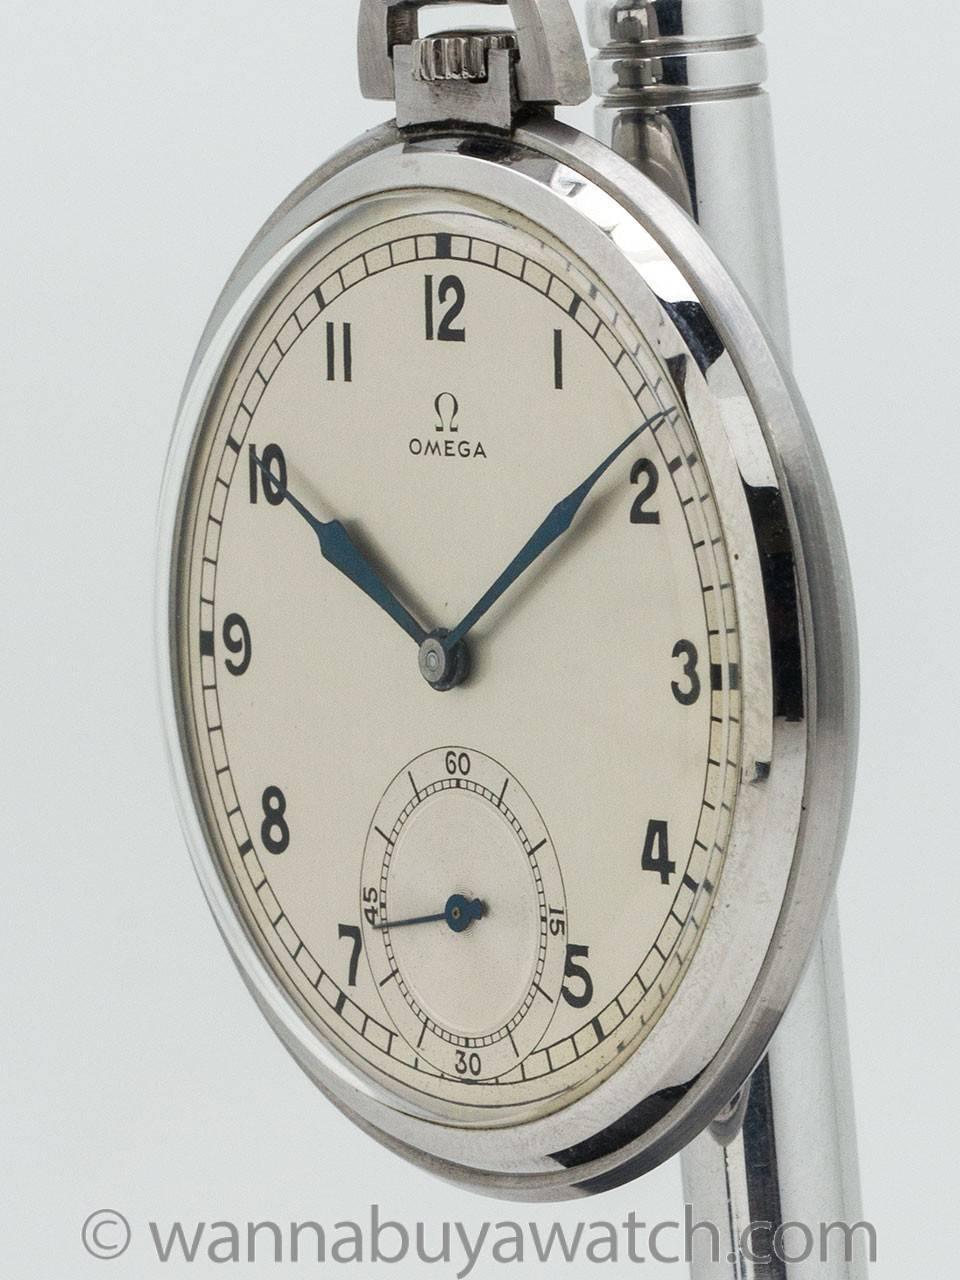 Omega man’s 12 size open face pocket watch circa late 1930s. Featuring 48mm diameter stainless steel case in very nice unpolished condition. With original matte silvered dial with black Arabic numerals and blued steel spade hands. Powered by 15